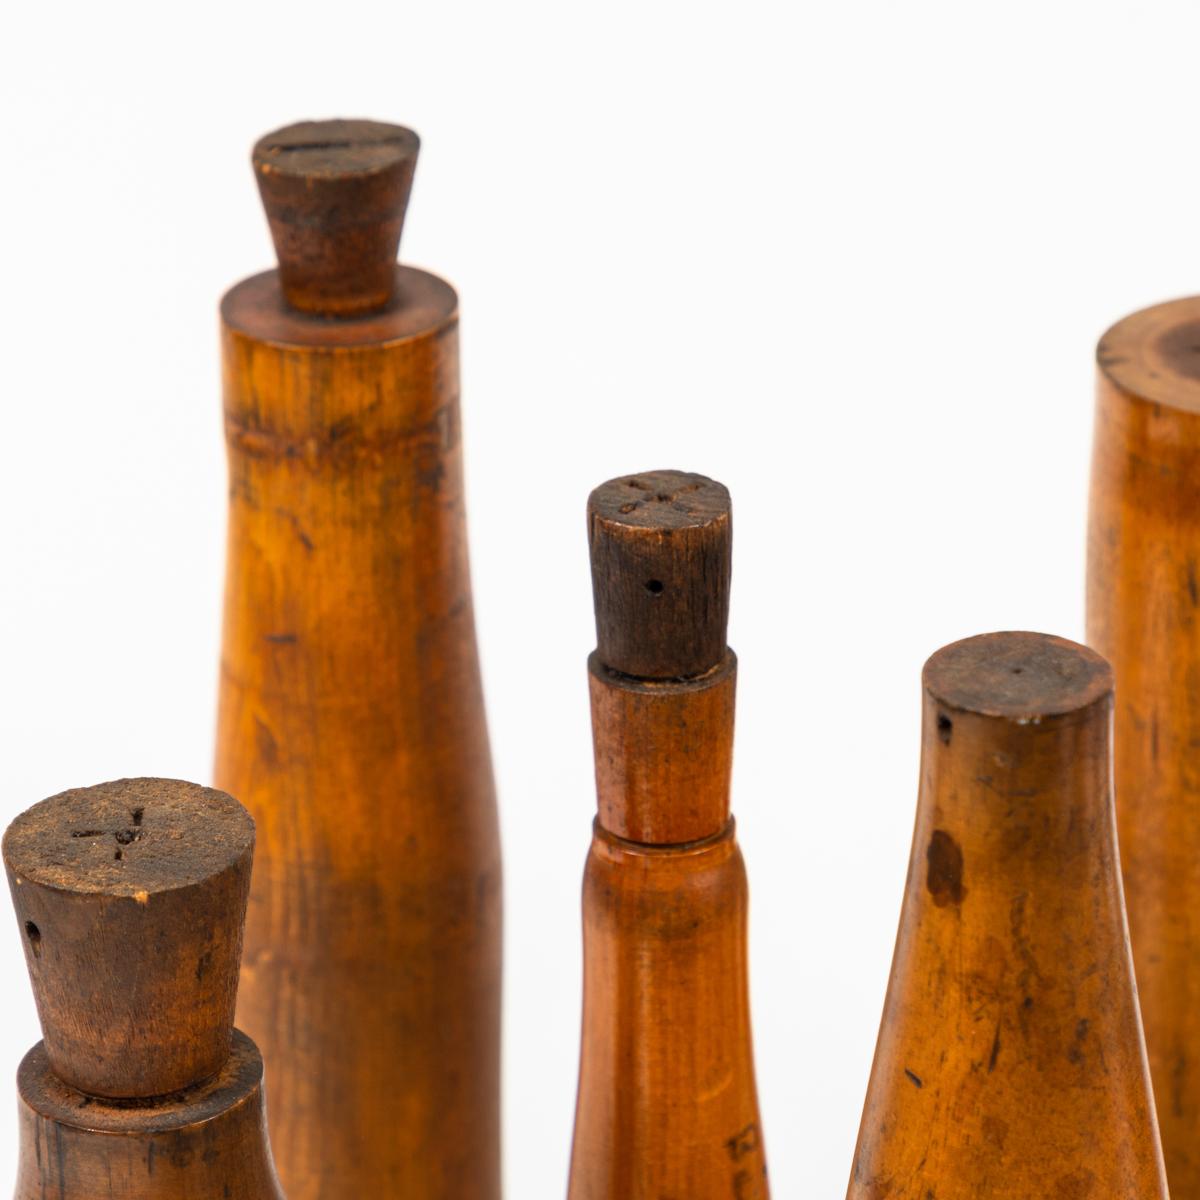 Edwardian Collection of Wooden Bottle Molds from the John Lumb and Co. Glassworks